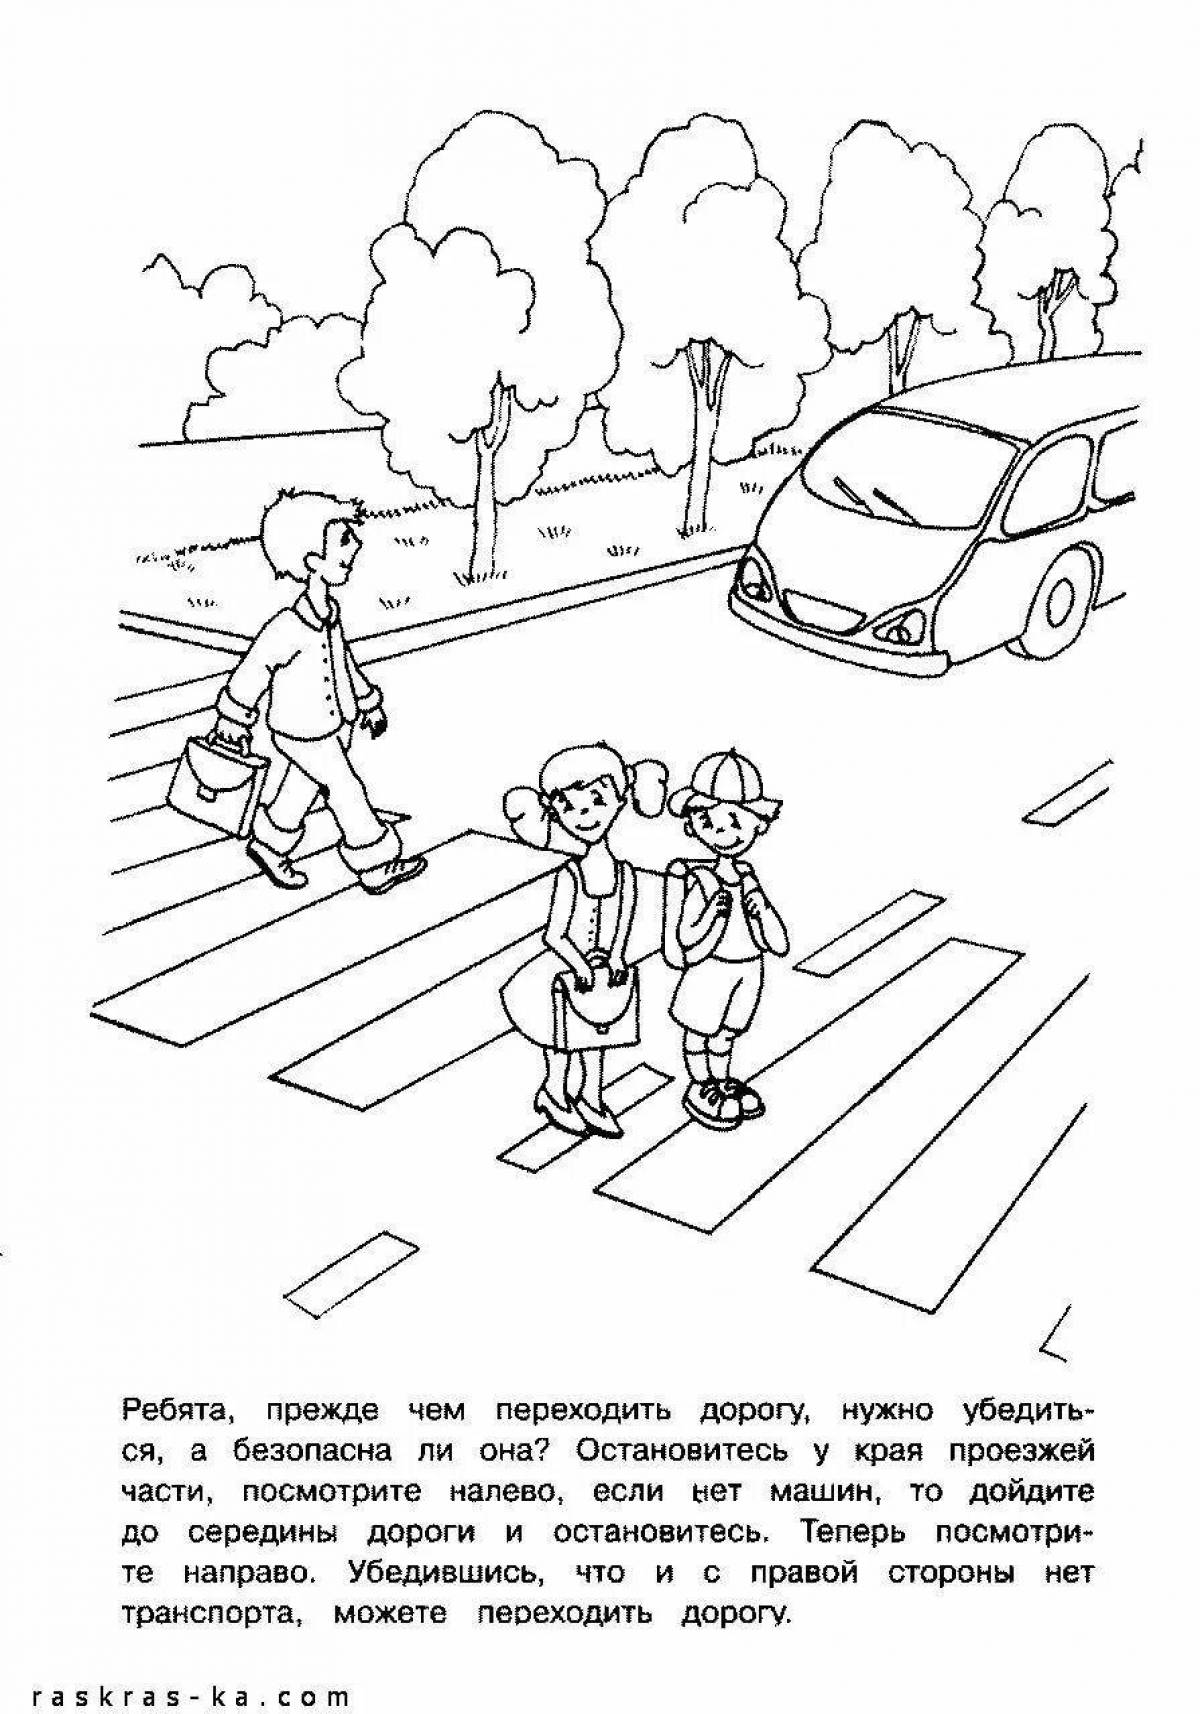 Colorful crosswalk coloring page for 6-7 year olds